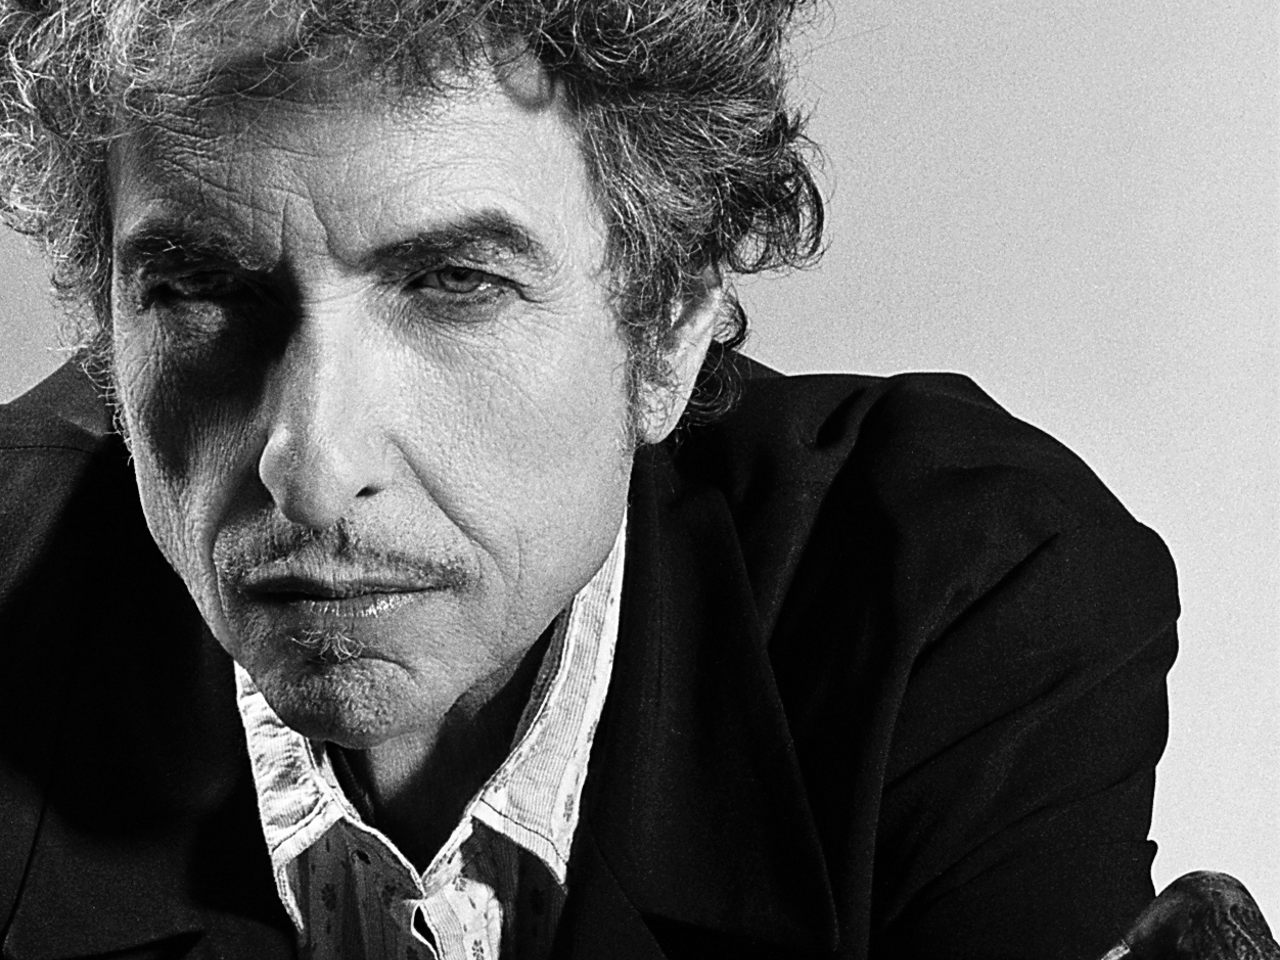 Dylan's Nobel speech: songs only need to move you, not make sense